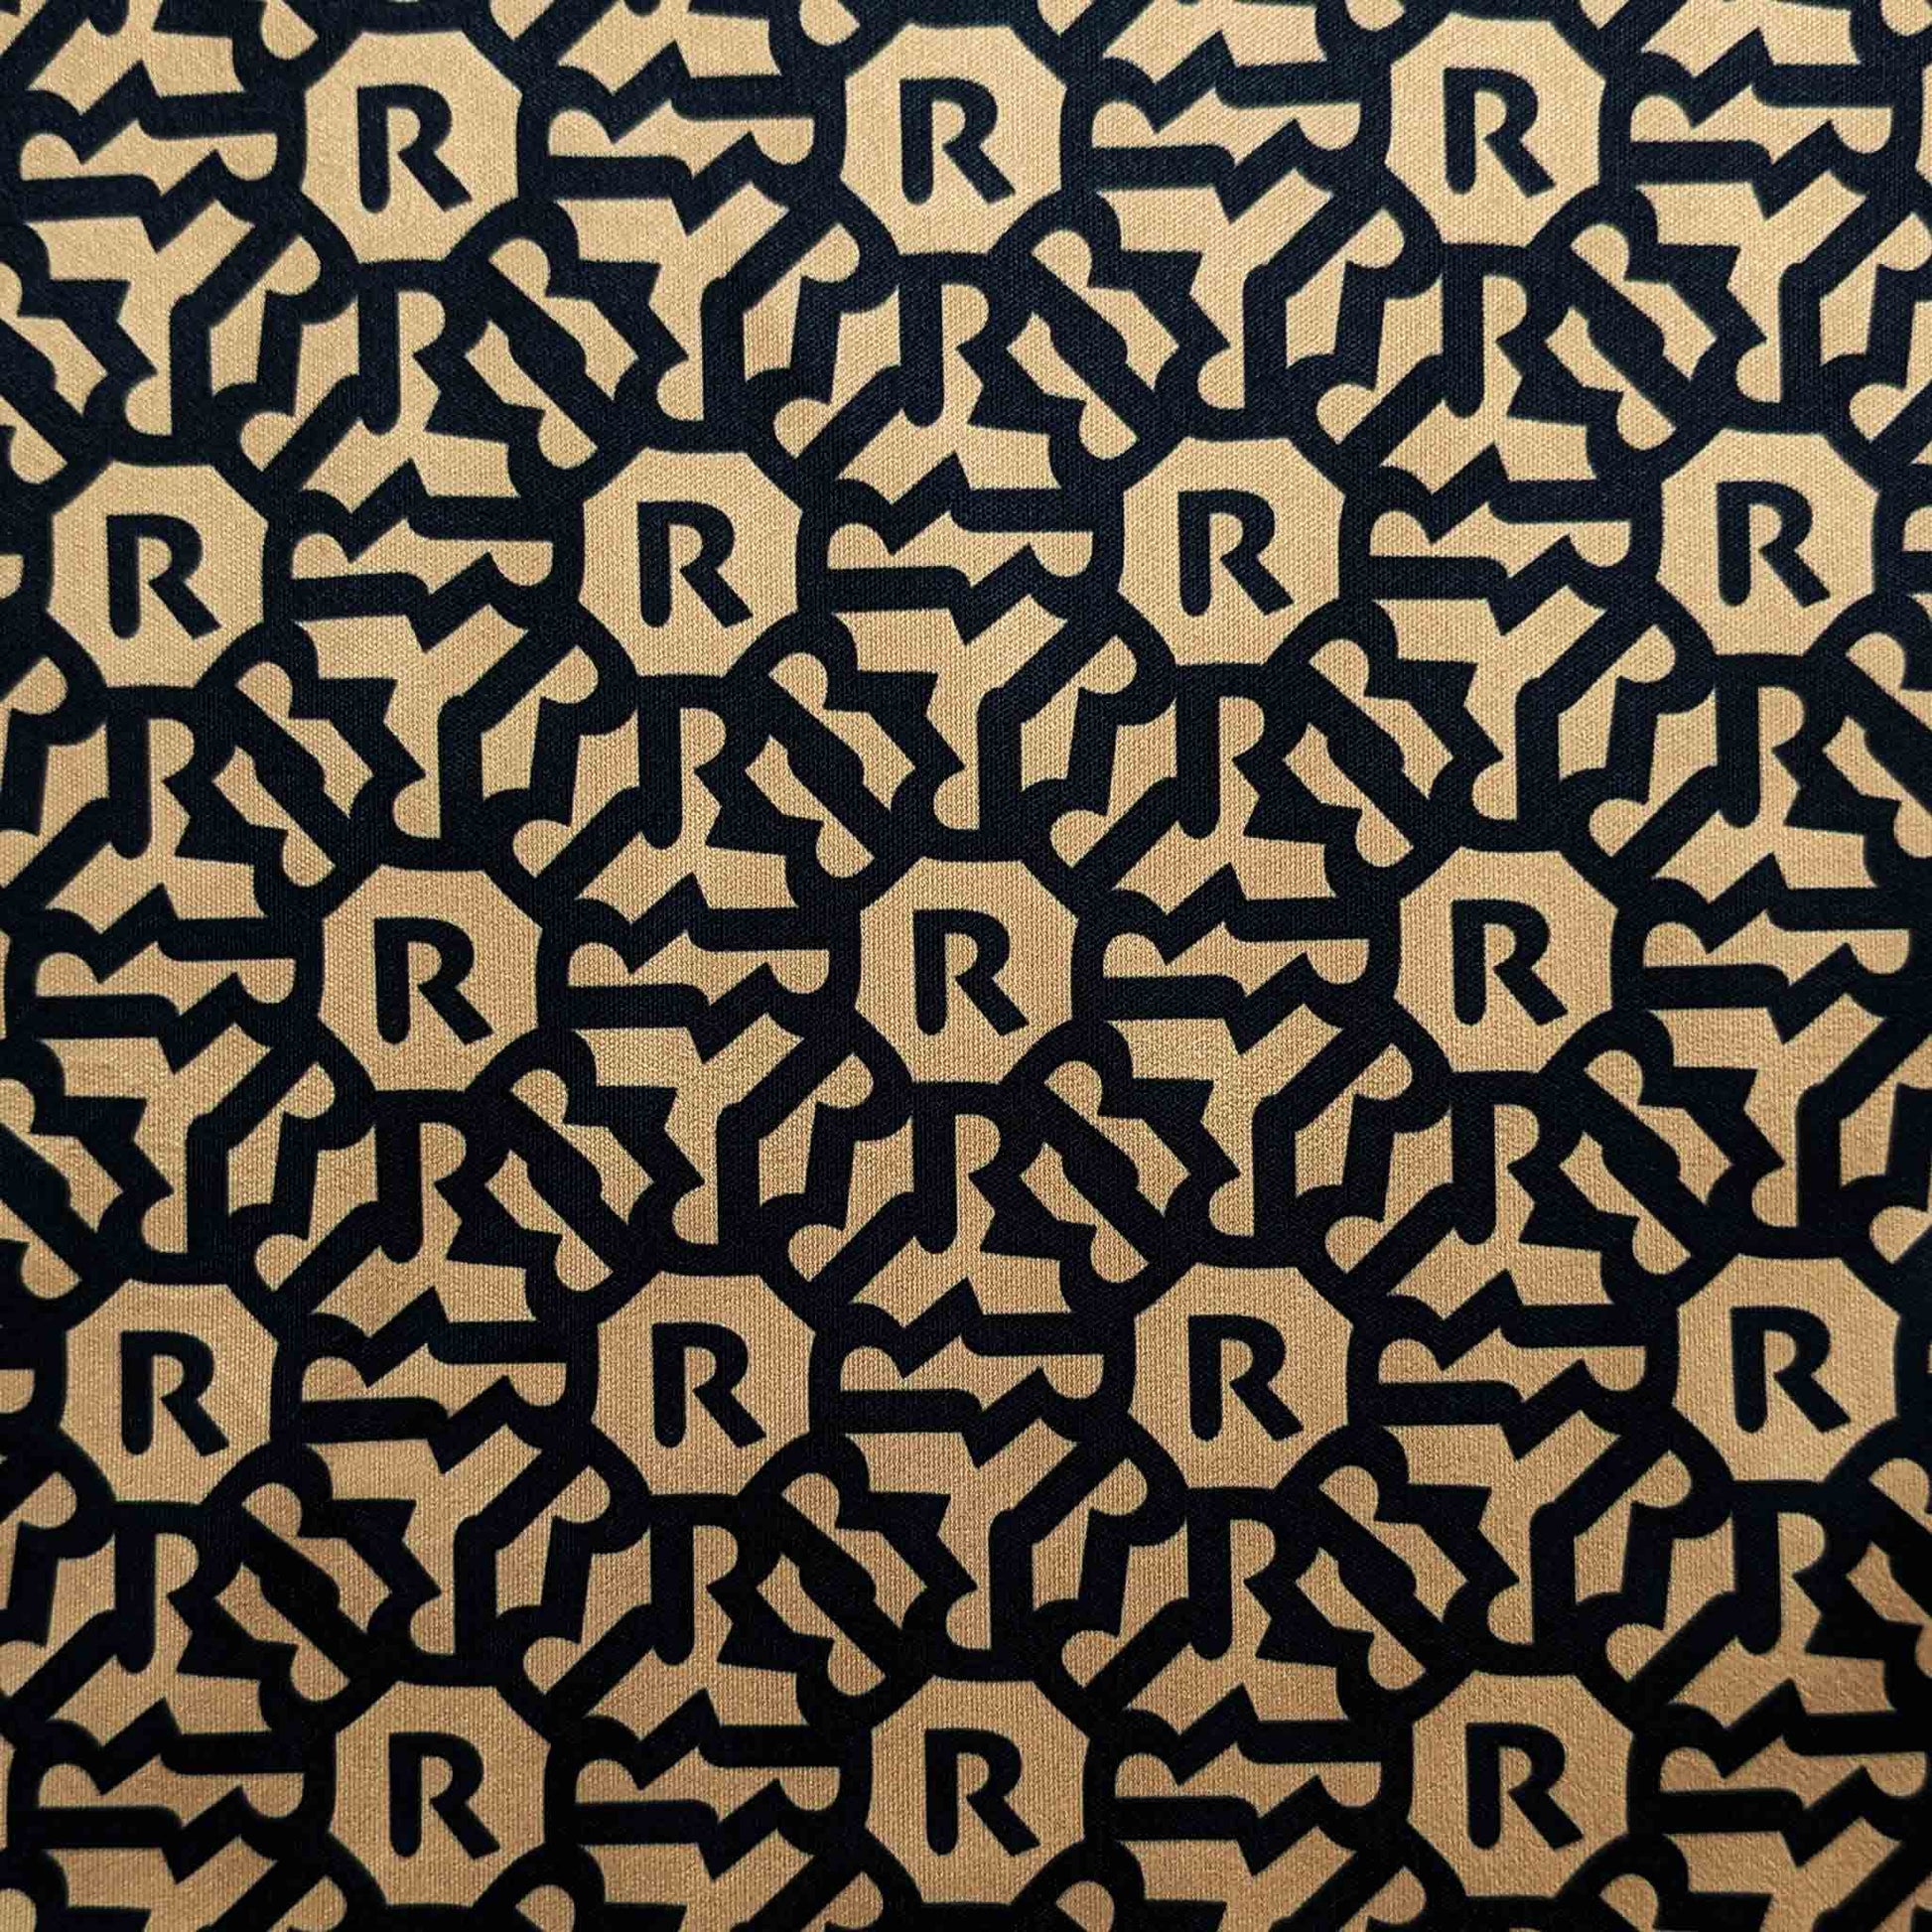 RULON Musical Instrument Cleaning Cloth - Octo Grid Pattern